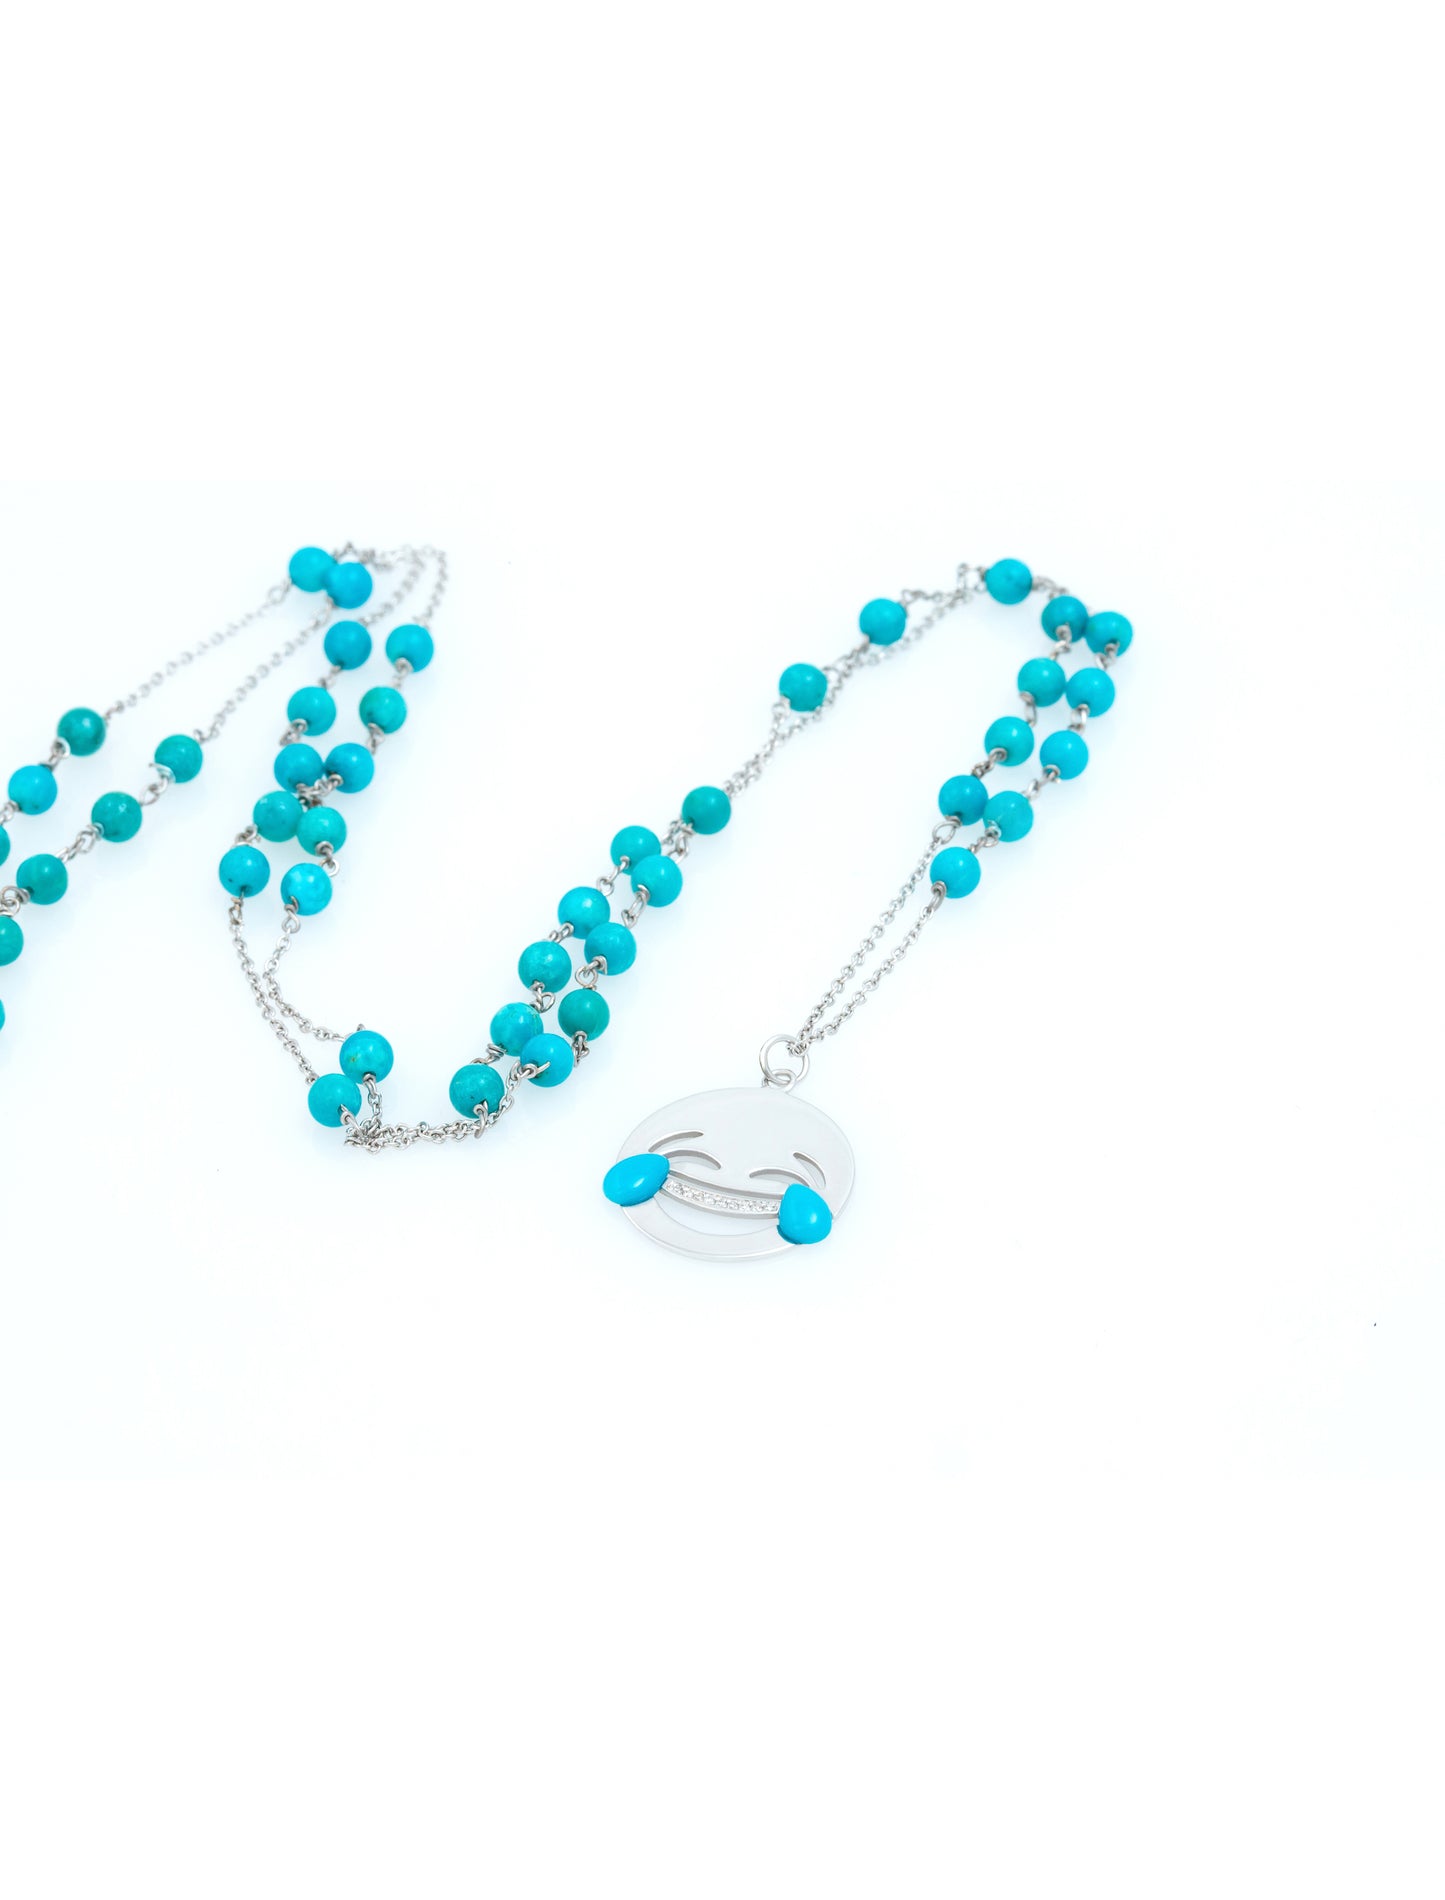 Laughing Tears Turquoise Necklace